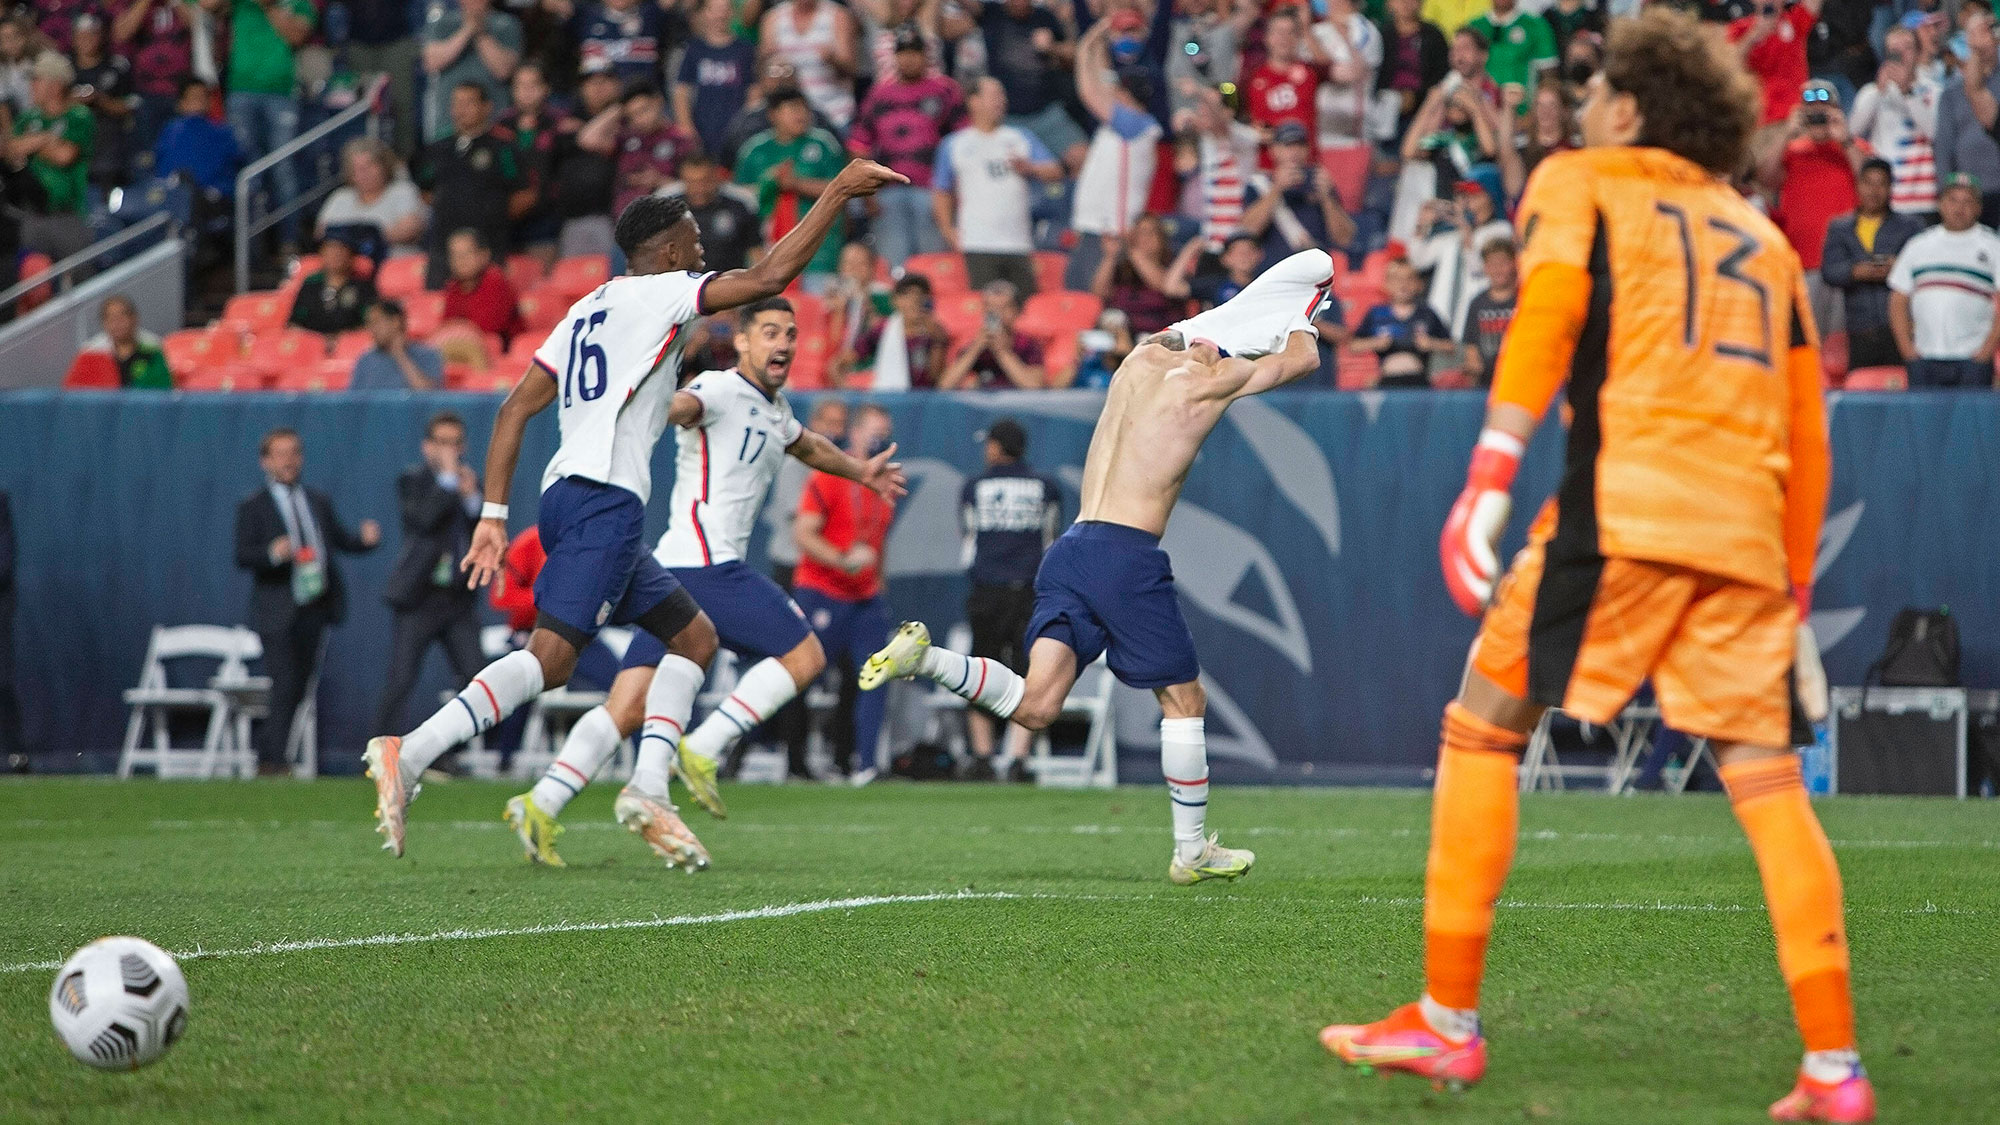 Christian Pulisic scores for the USA vs. Mexico in the Nations League final